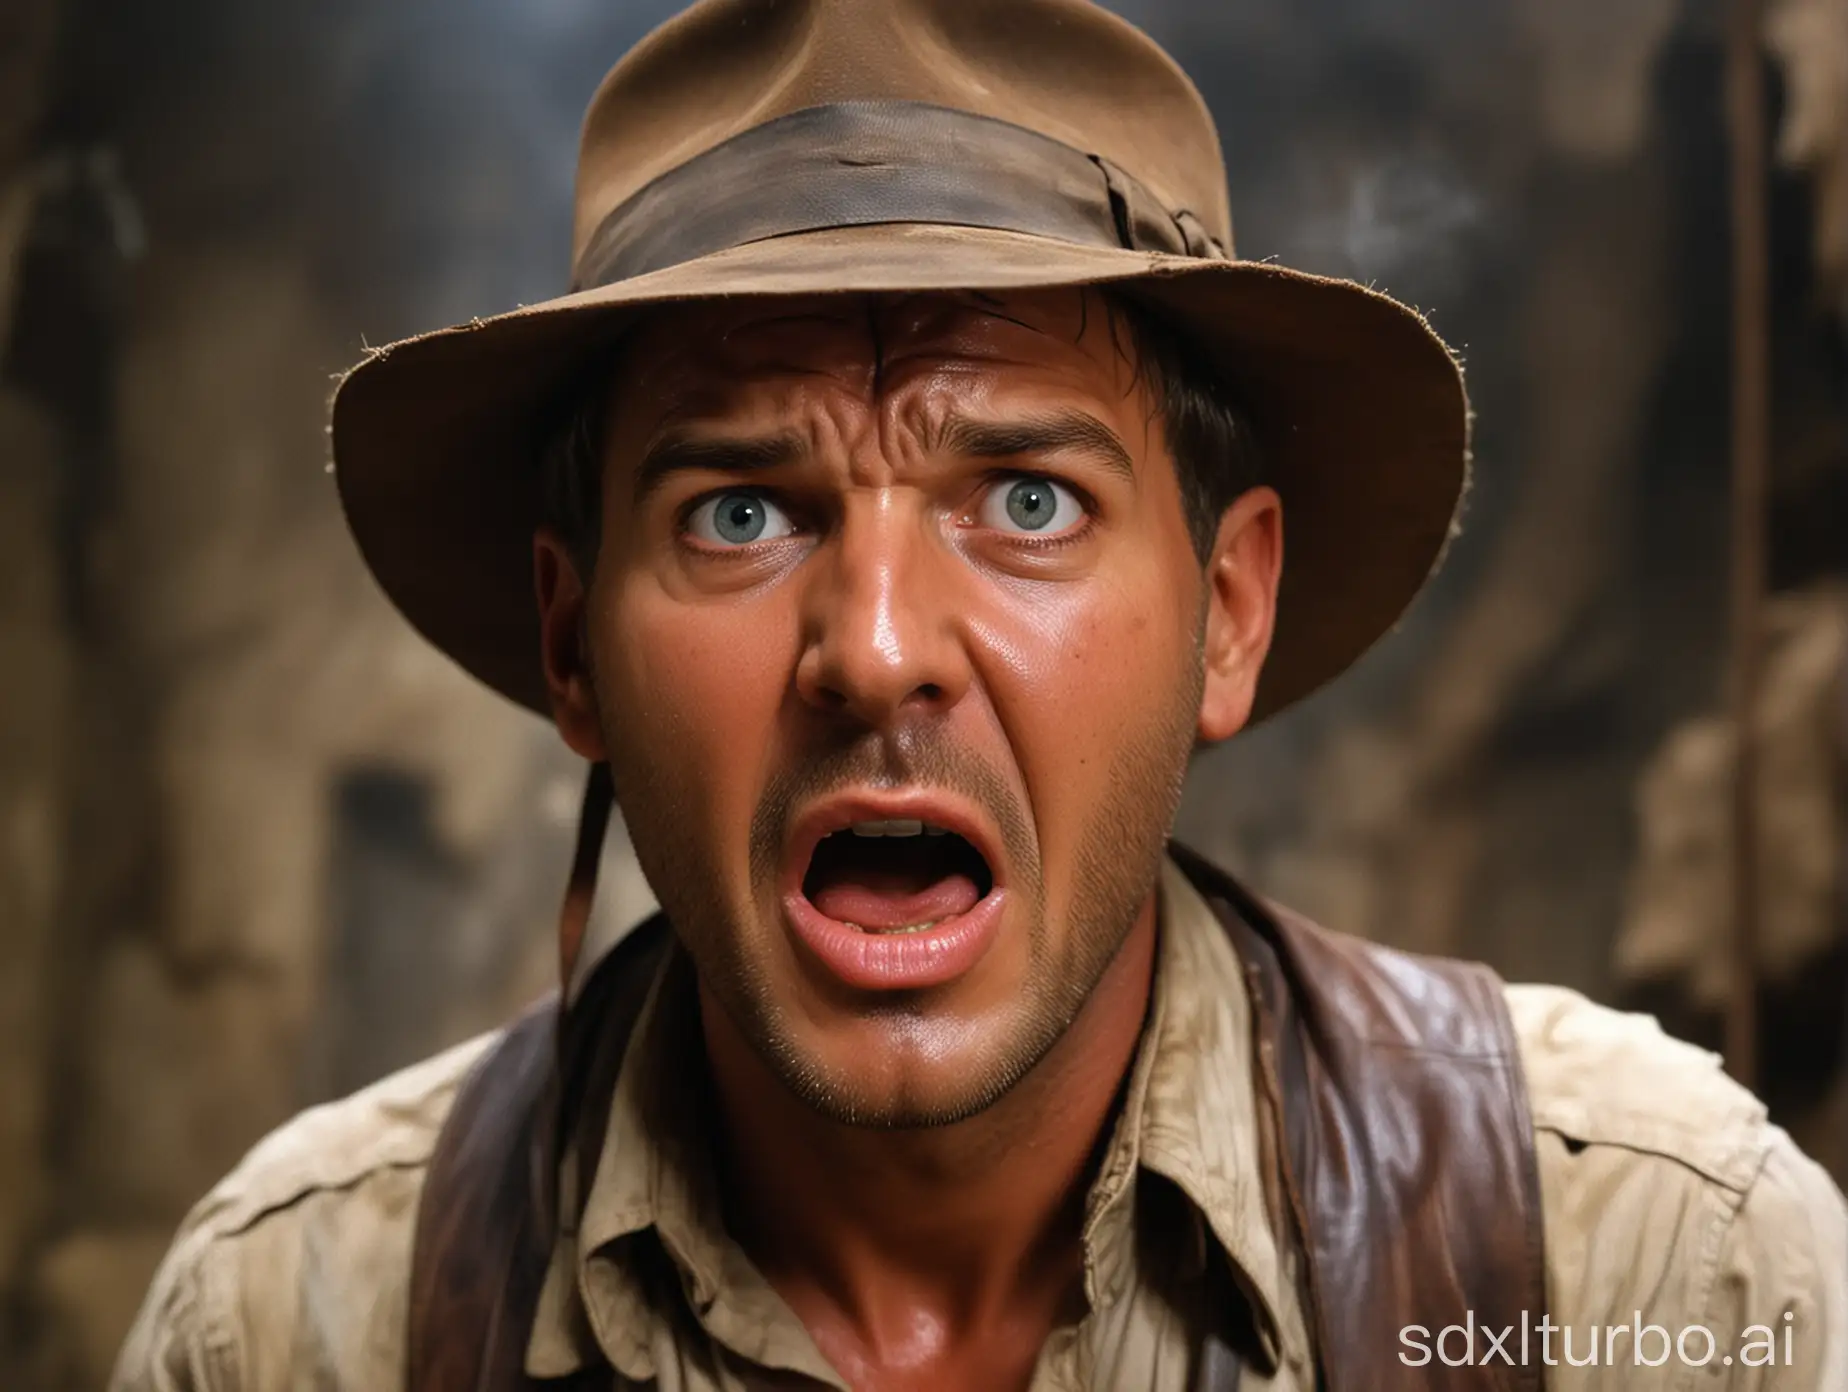 Indiana jones with an extremely shocked expression on his face, 